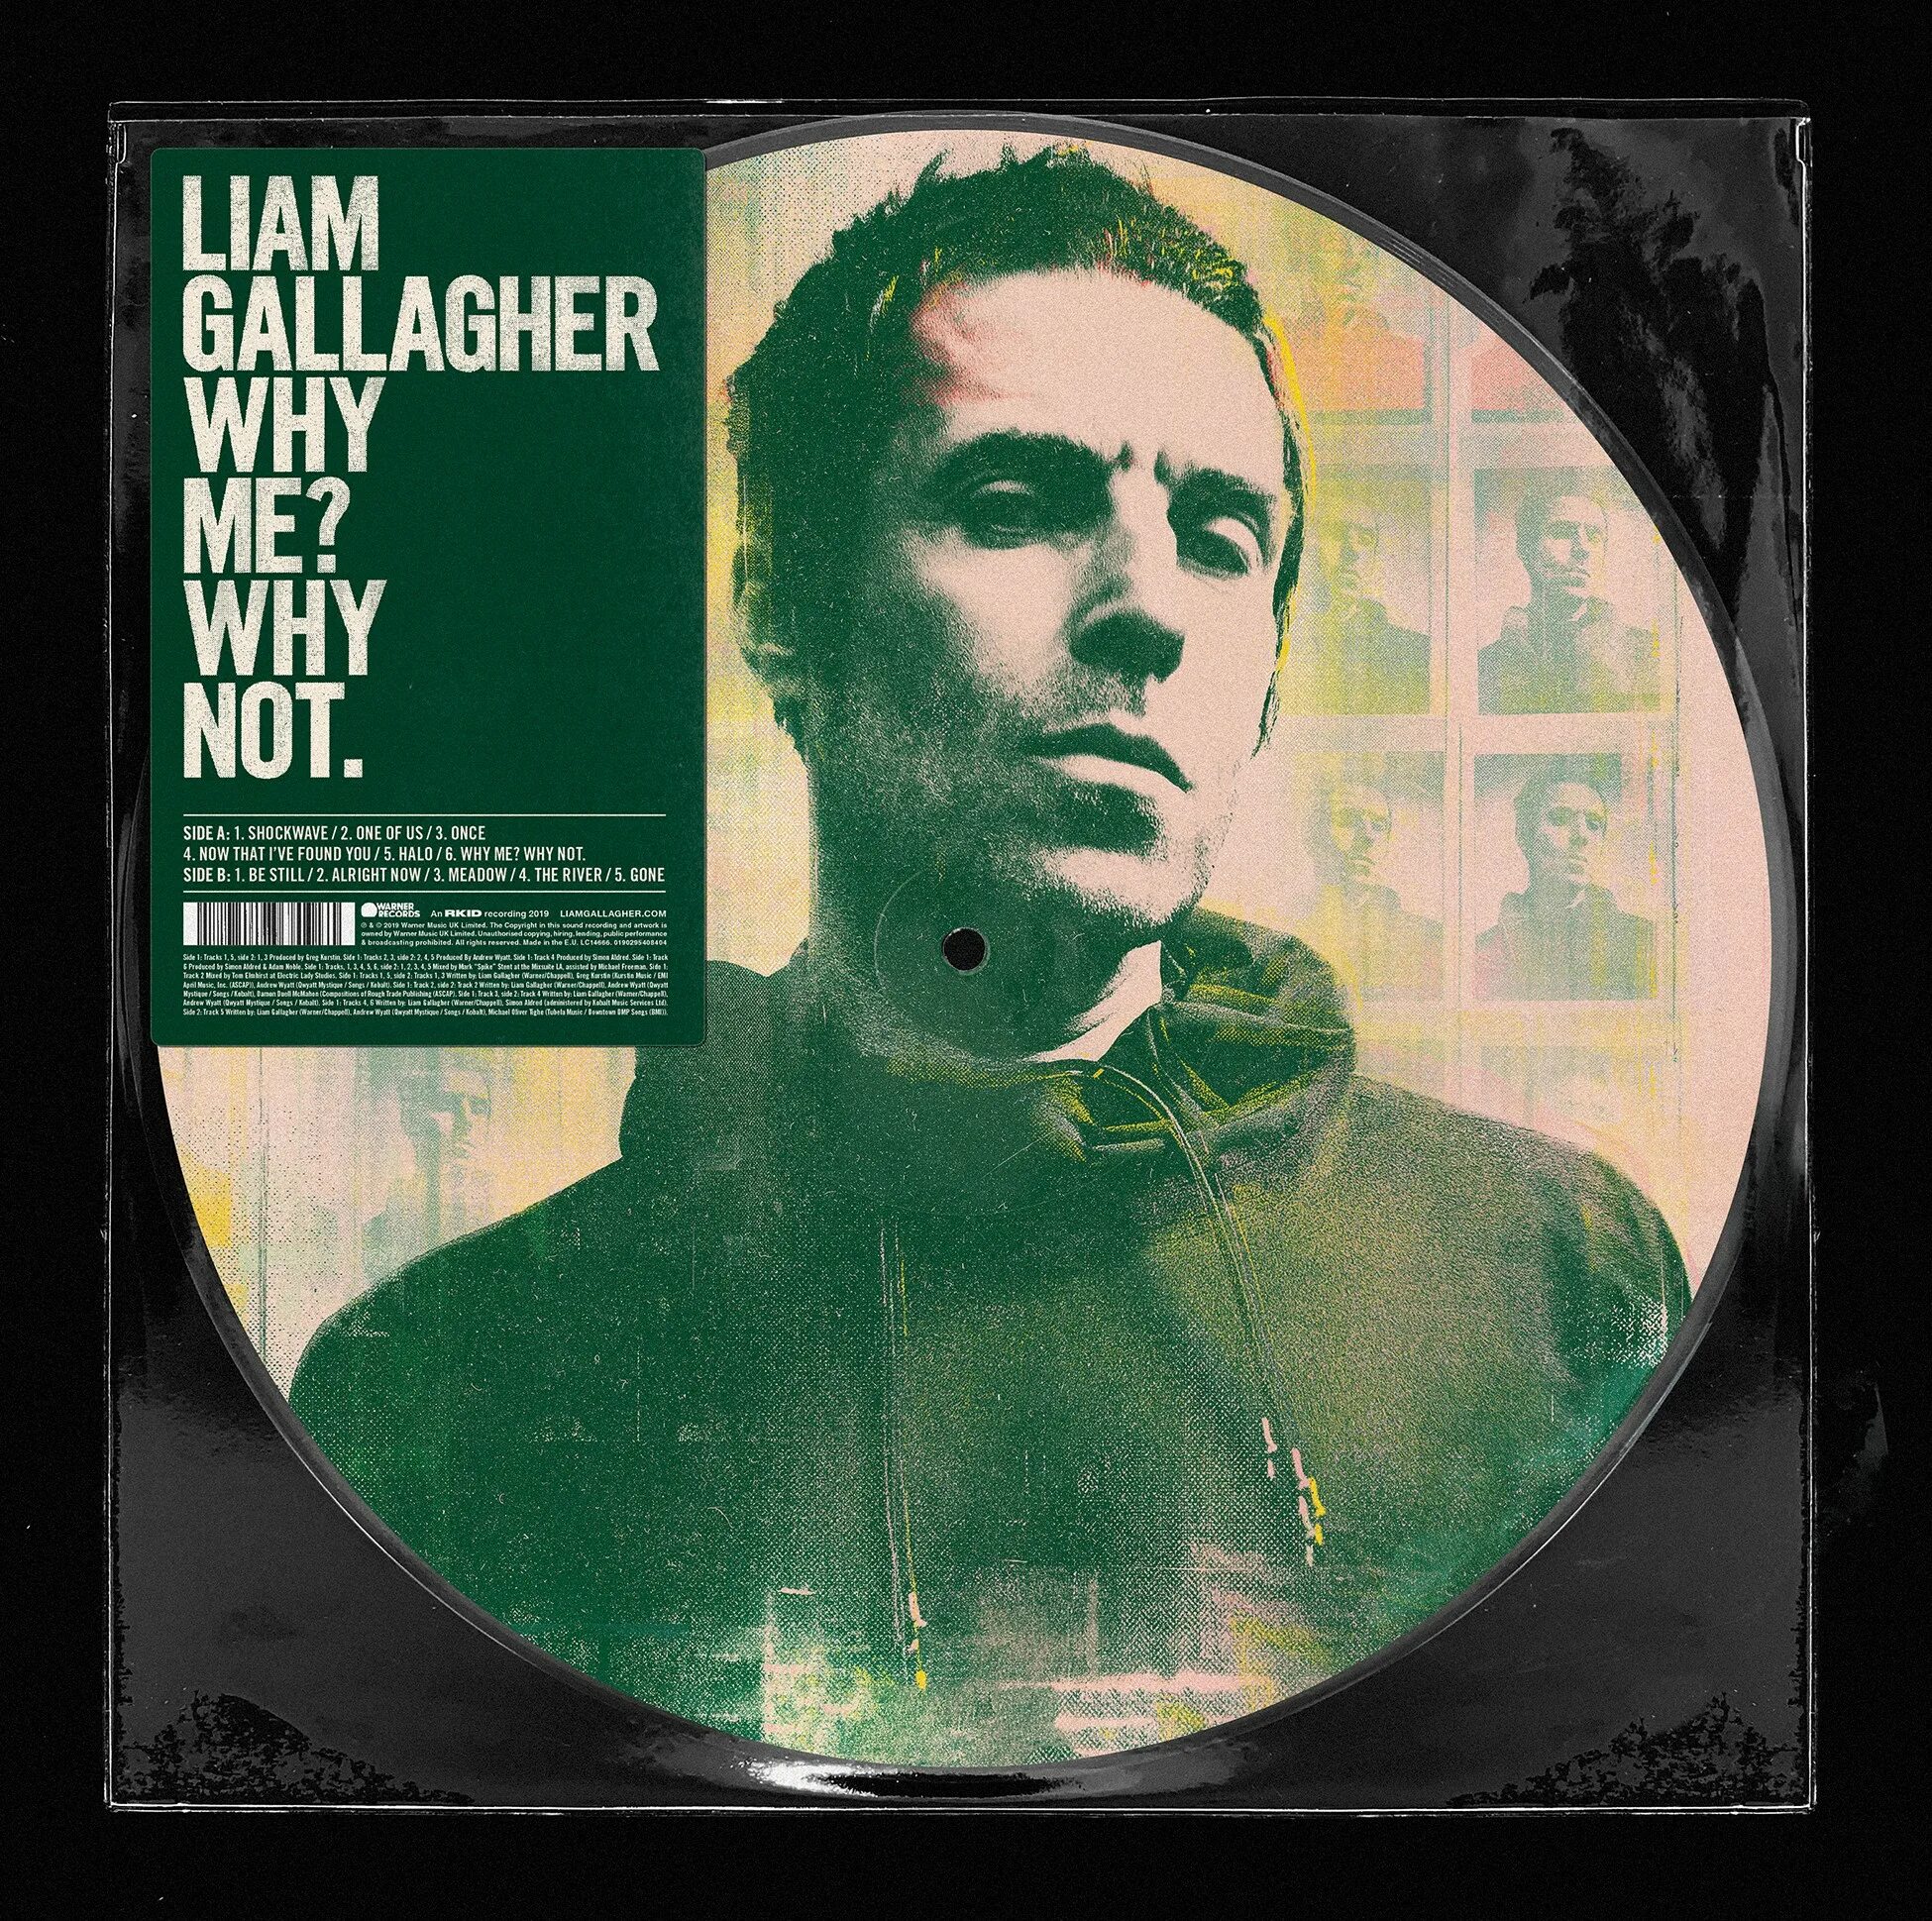 Liam Gallagher why me why not. Liam Gallagher Vinyl. Liam Gallagher album why me why not. Liam Gallagher c'mon you know винил. Liam gallagher john squire